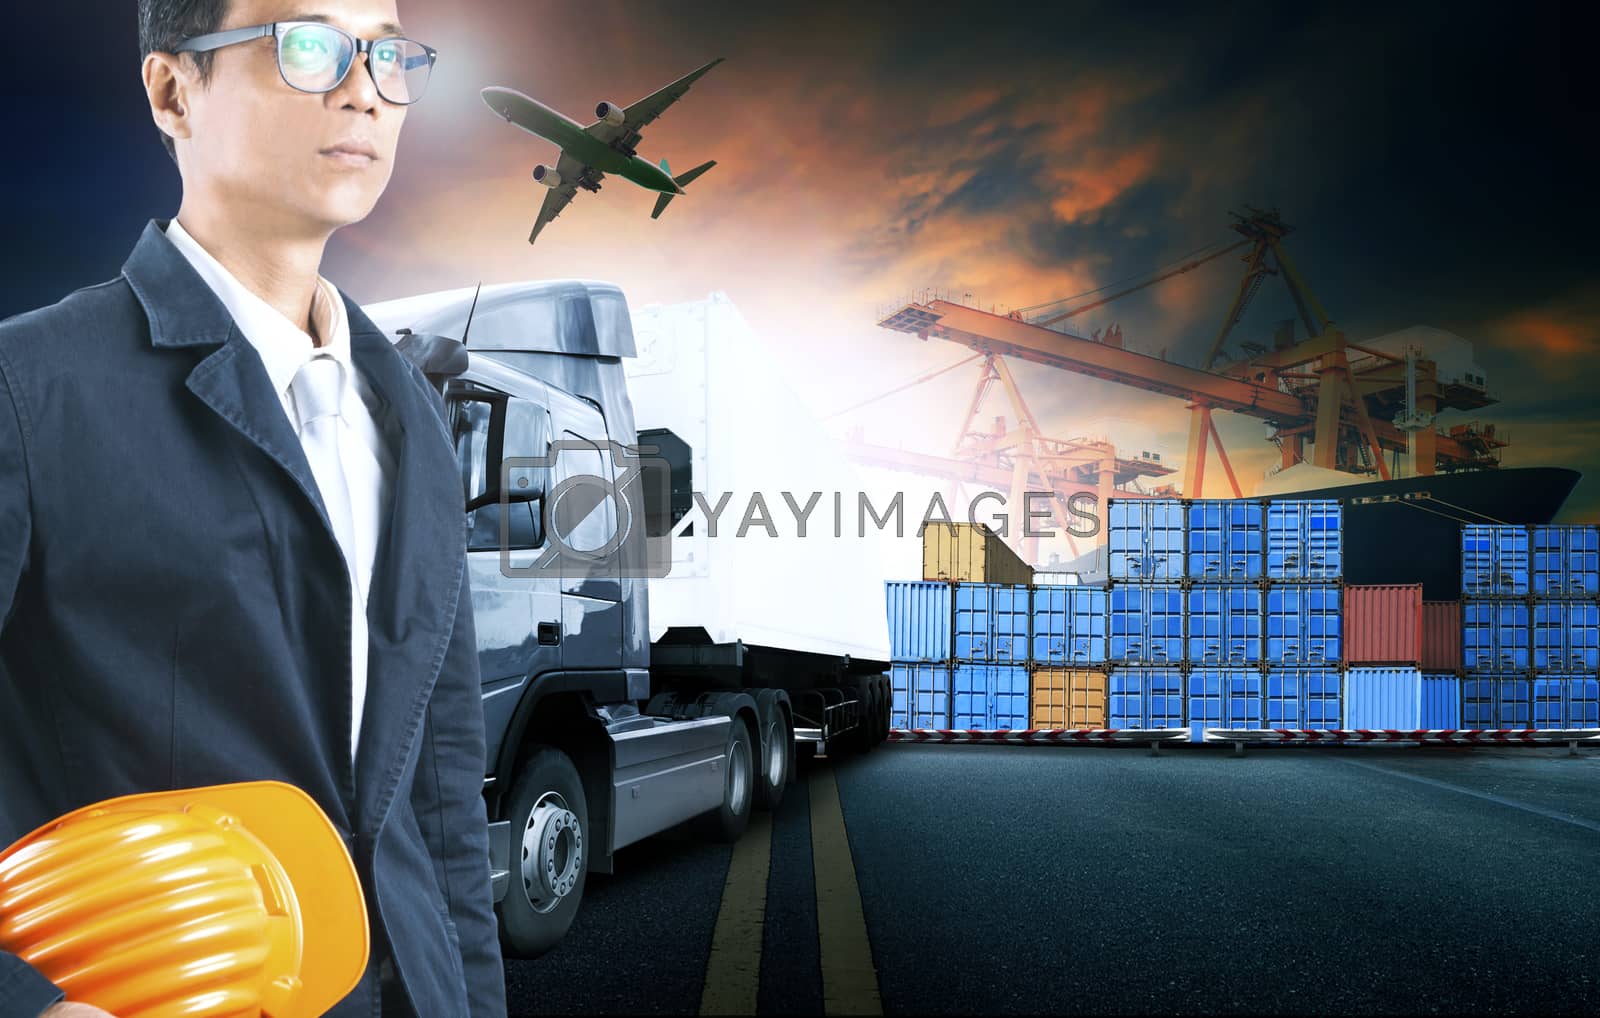 Royalty free image of business man working in shipping port use for logistic and cargo by khunaspix